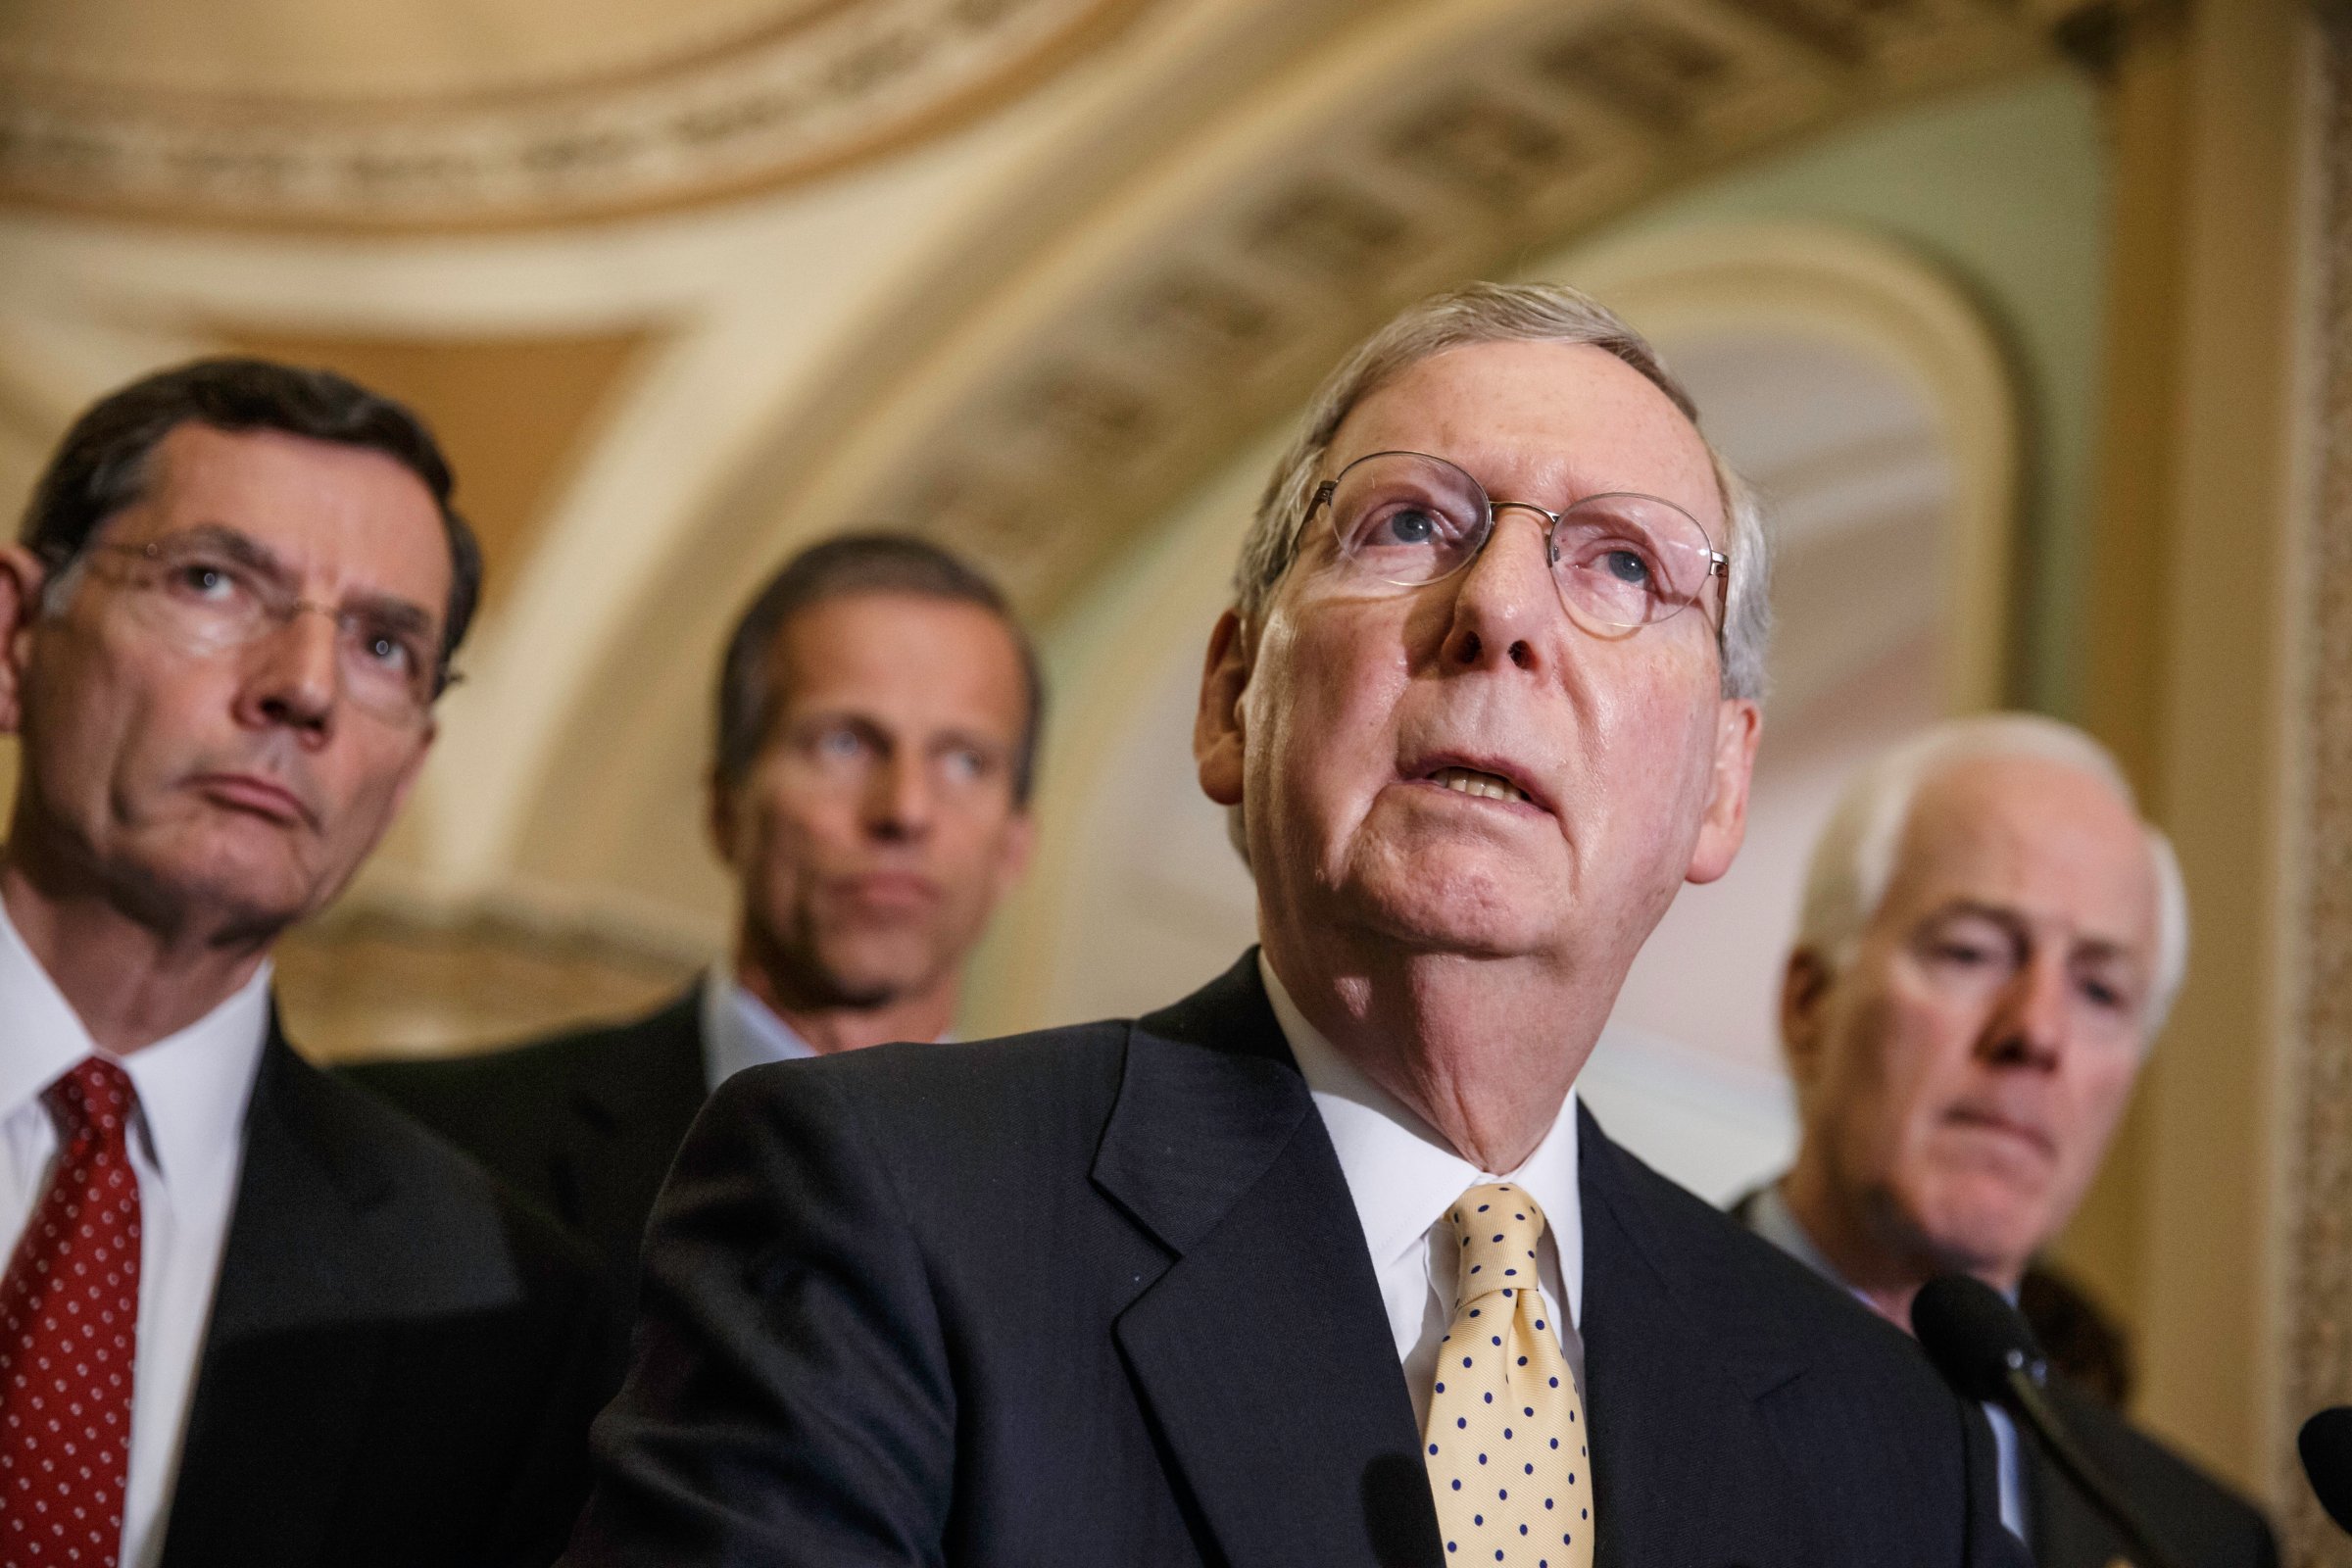 Senate Minority Leader Mitch McConnell, R-Ky., and GOP lawmakers, from left, Sen. John Barrasso, R-Wyo., Sen. John Thune, R-S.D., and Senate Minority Whip John Cornyn, R-Texas, face reporters after a Republican caucus meeting, at the Capitol in Washington on June 10, 2014.